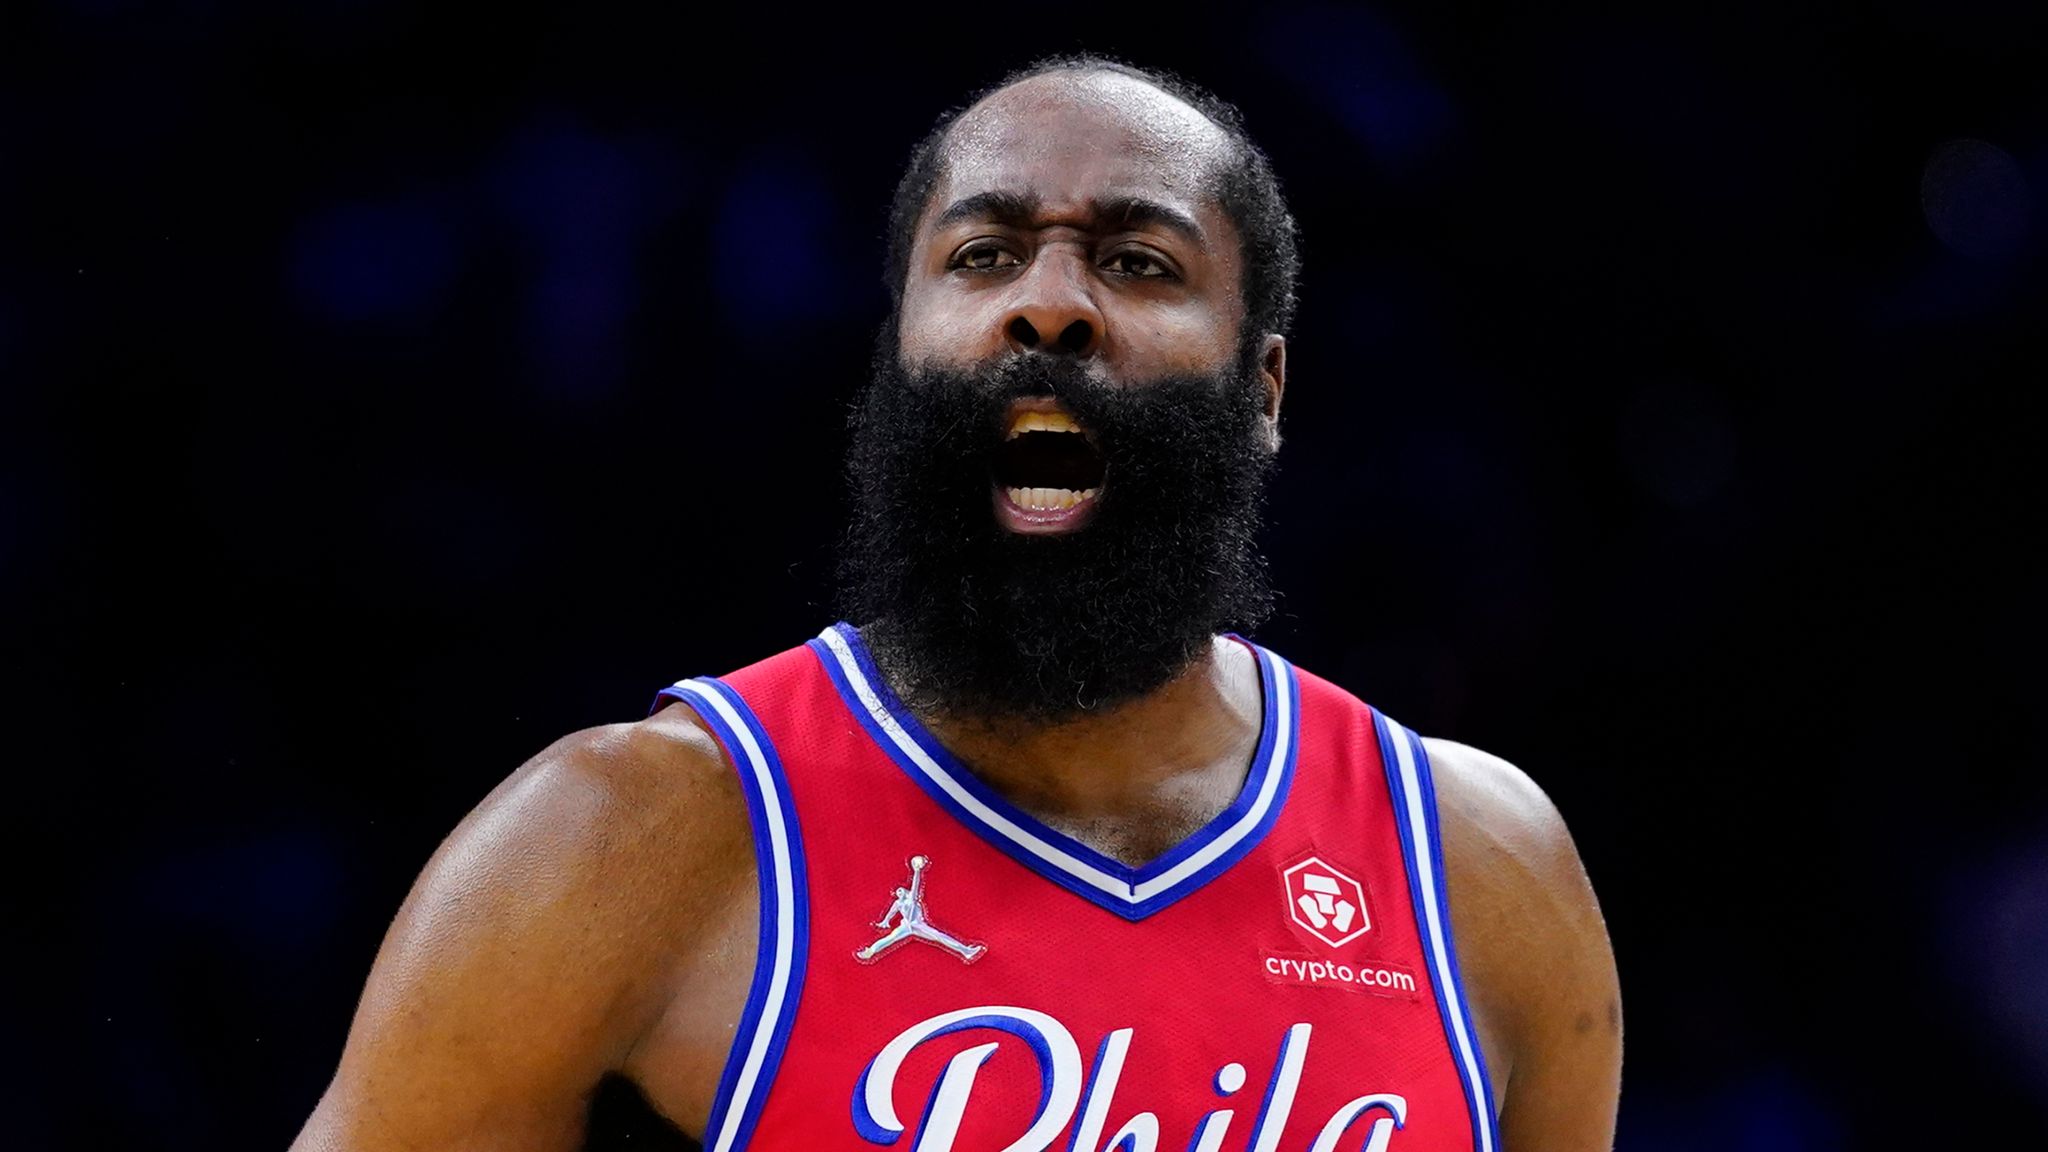 Nets' James Harden becomes first player in NBA history to have a